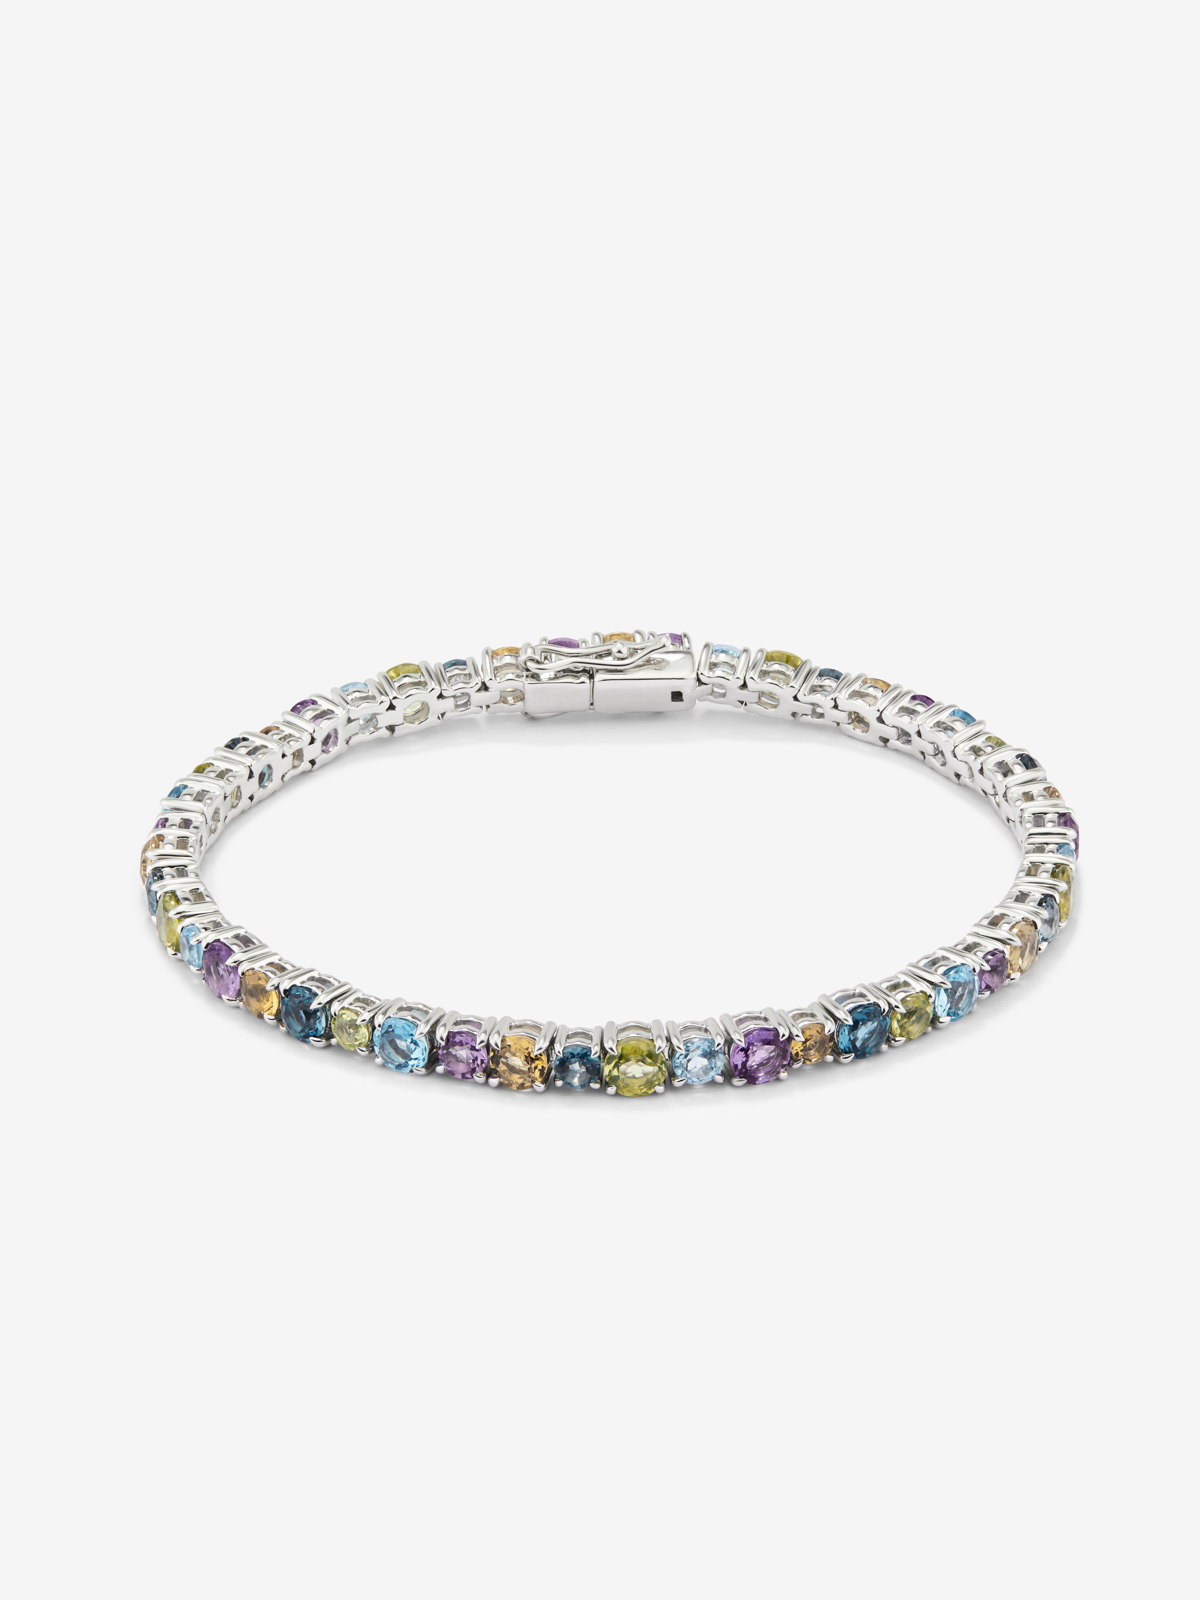 925 Silver Riviere Bracelet with Multicolor Gems